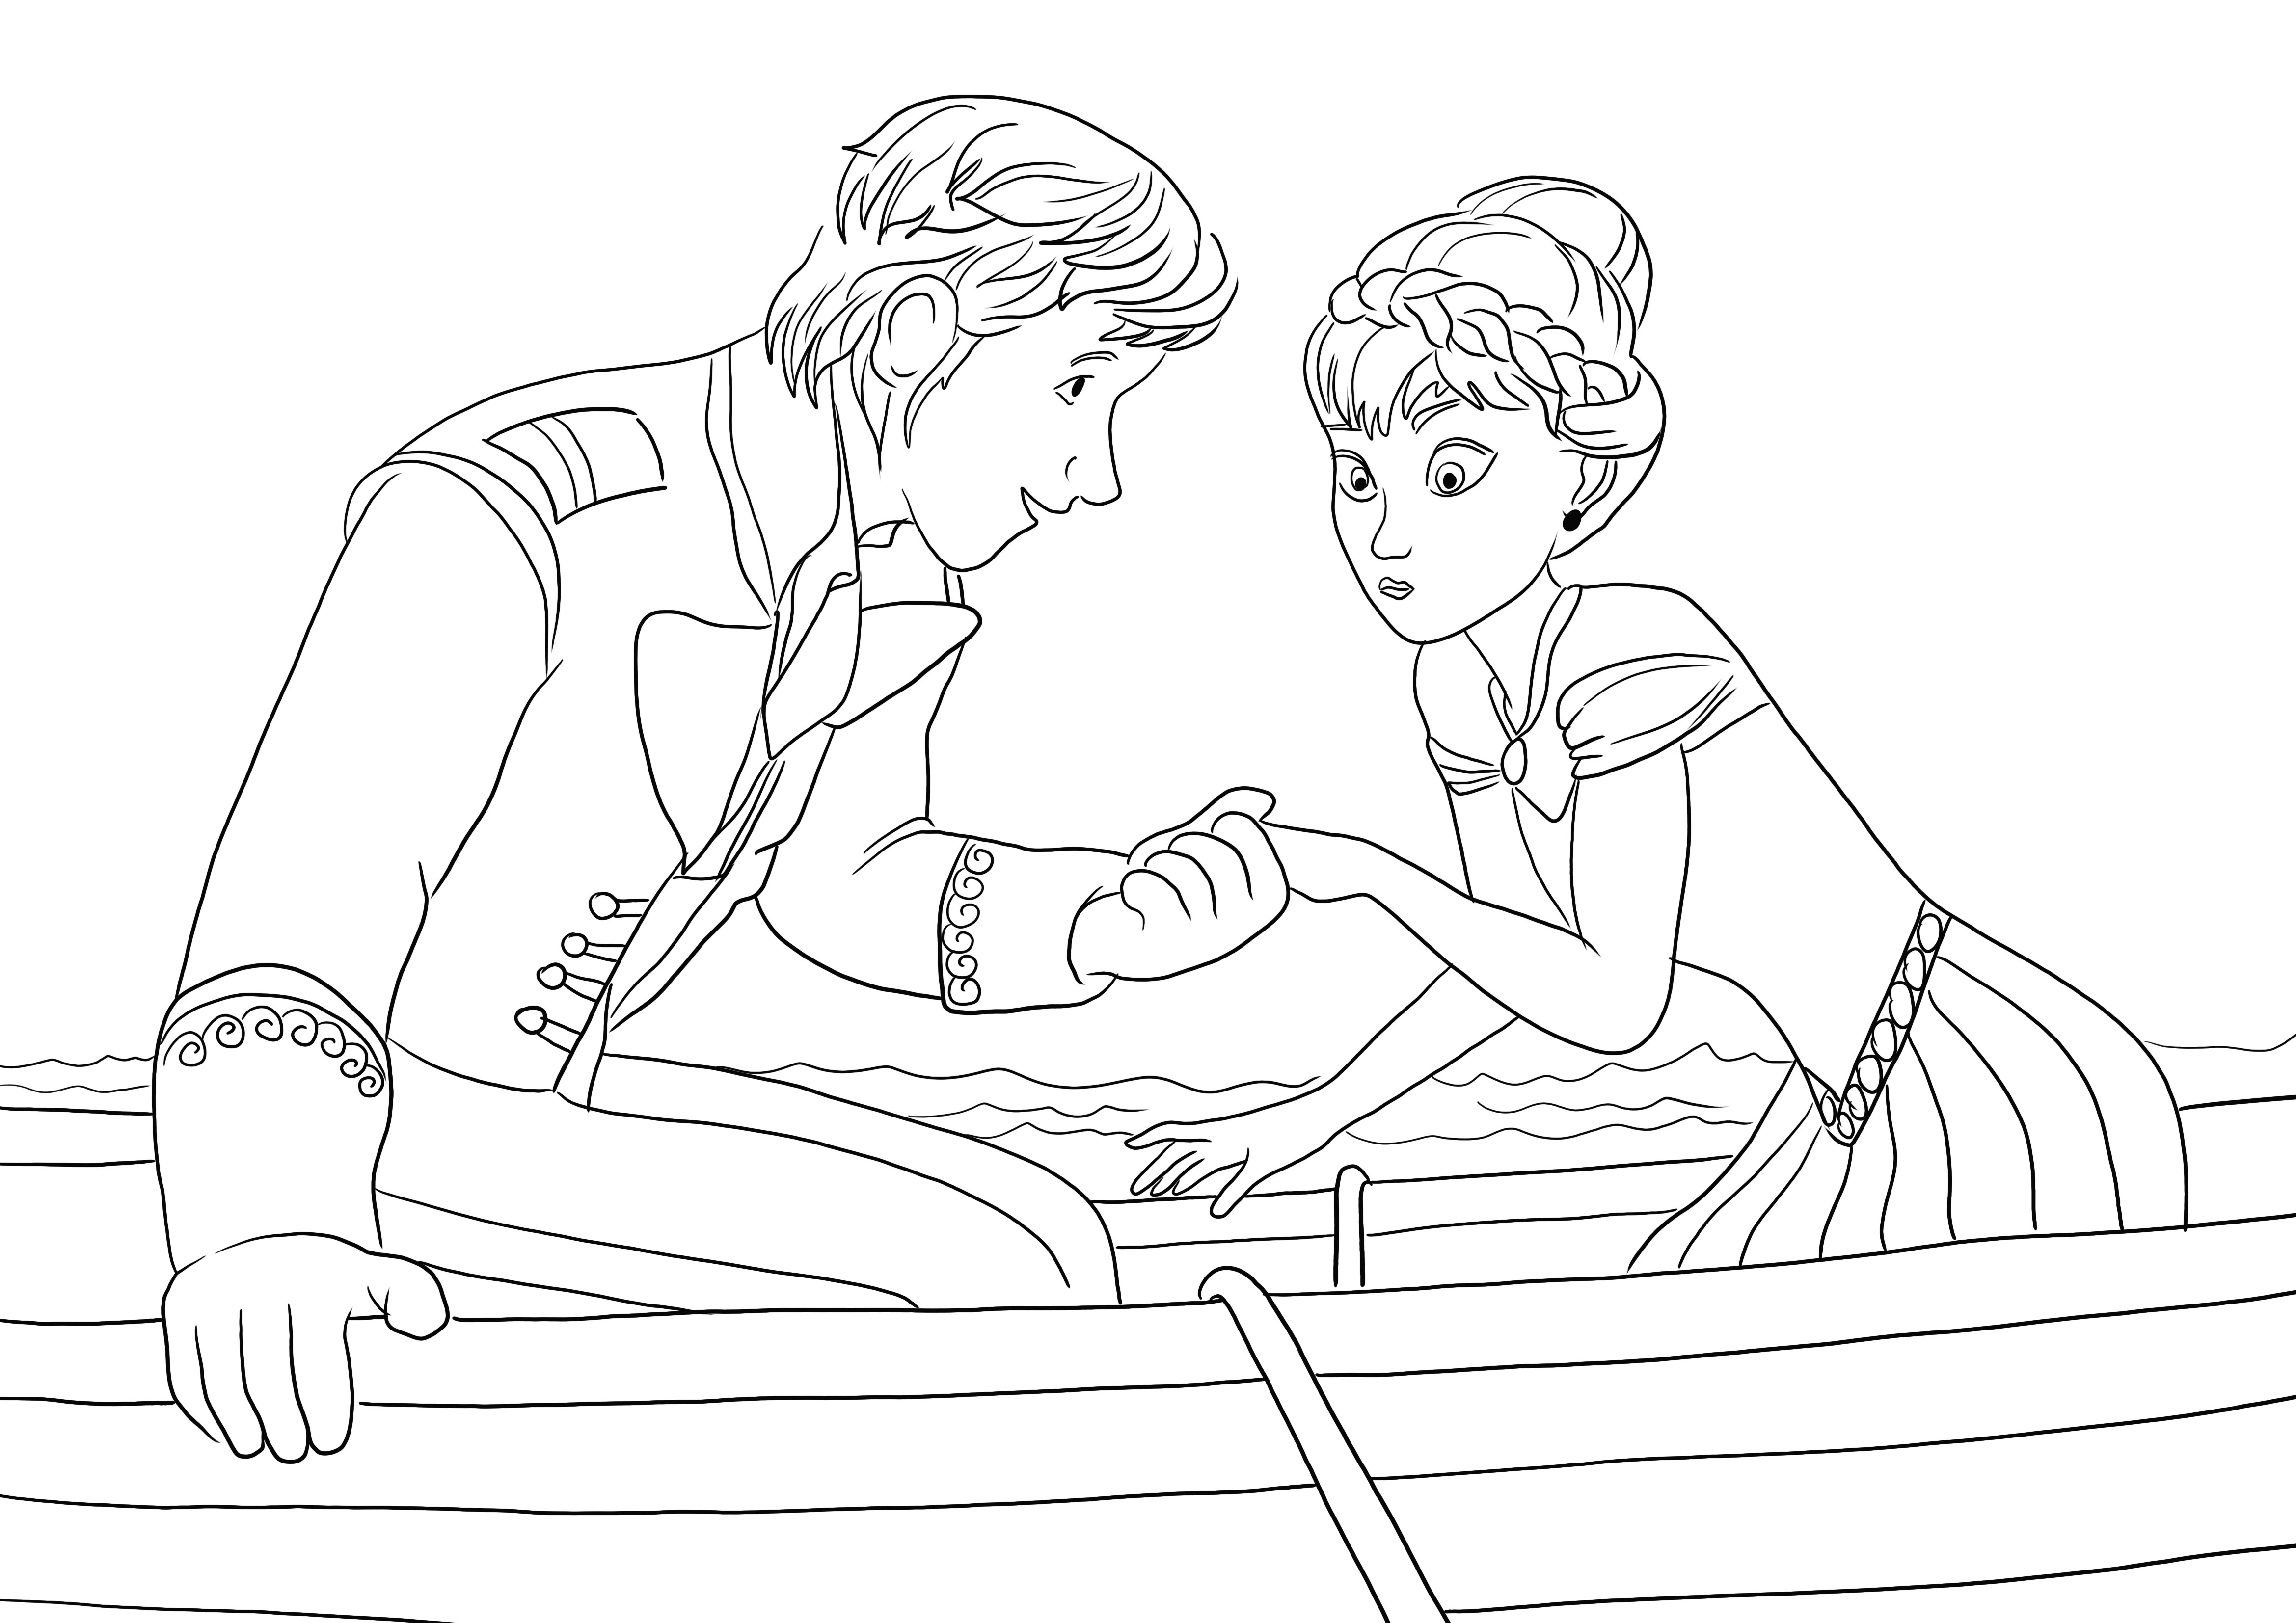 Anna meets Hans for the first time-a coloring page for free downloading for kids to color